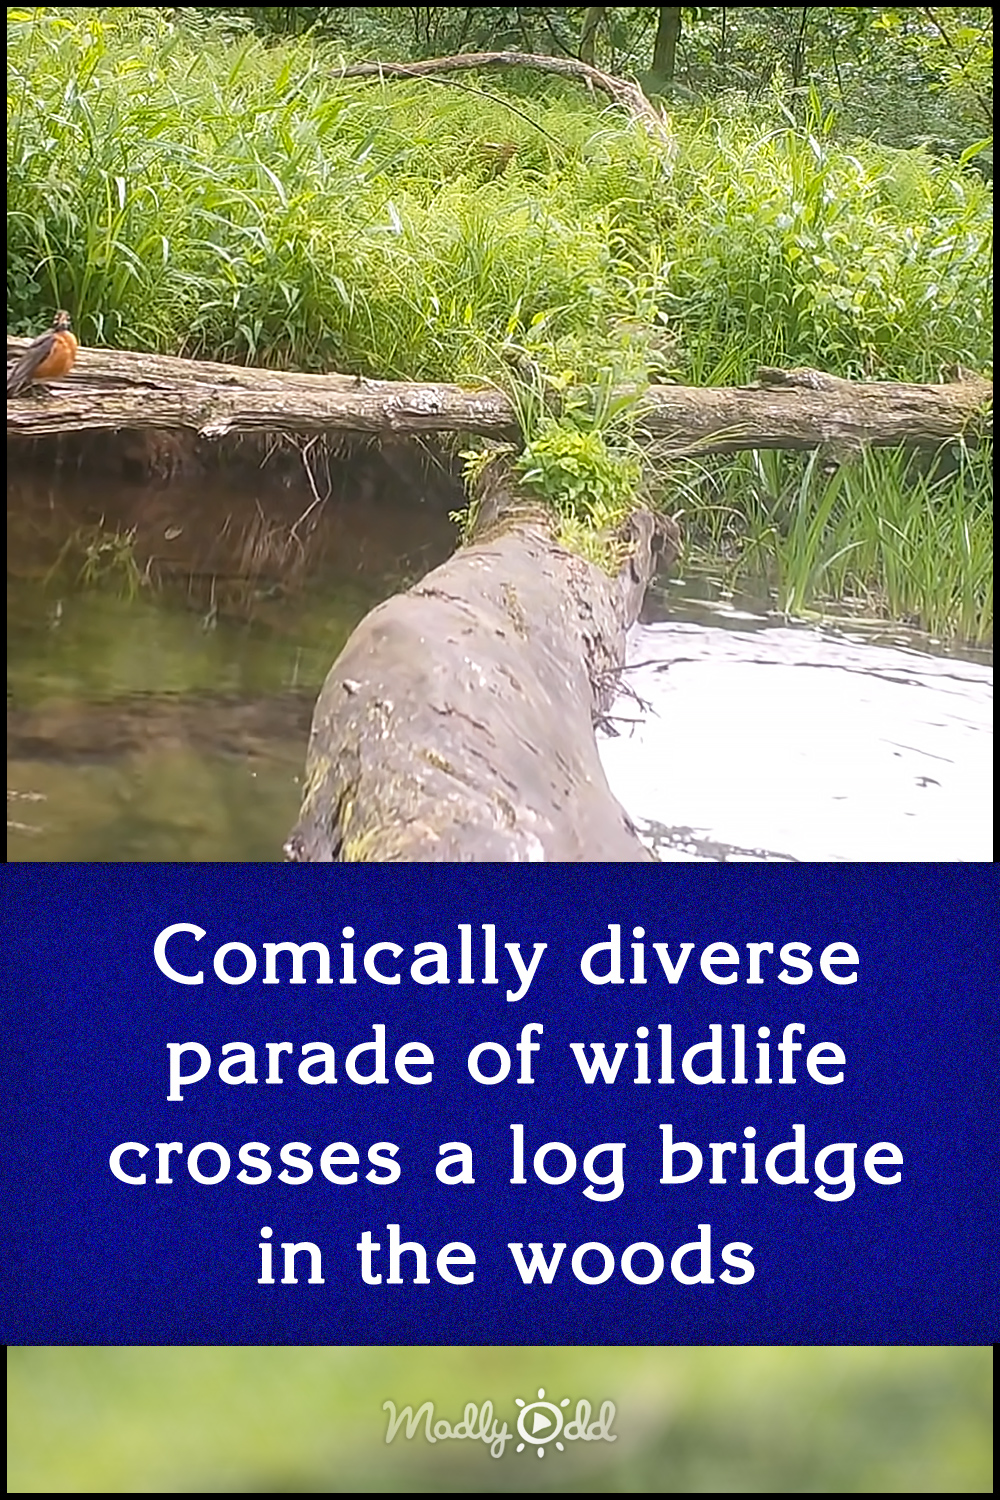 Comically diverse parade of wildlife crosses a log bridge in the woods